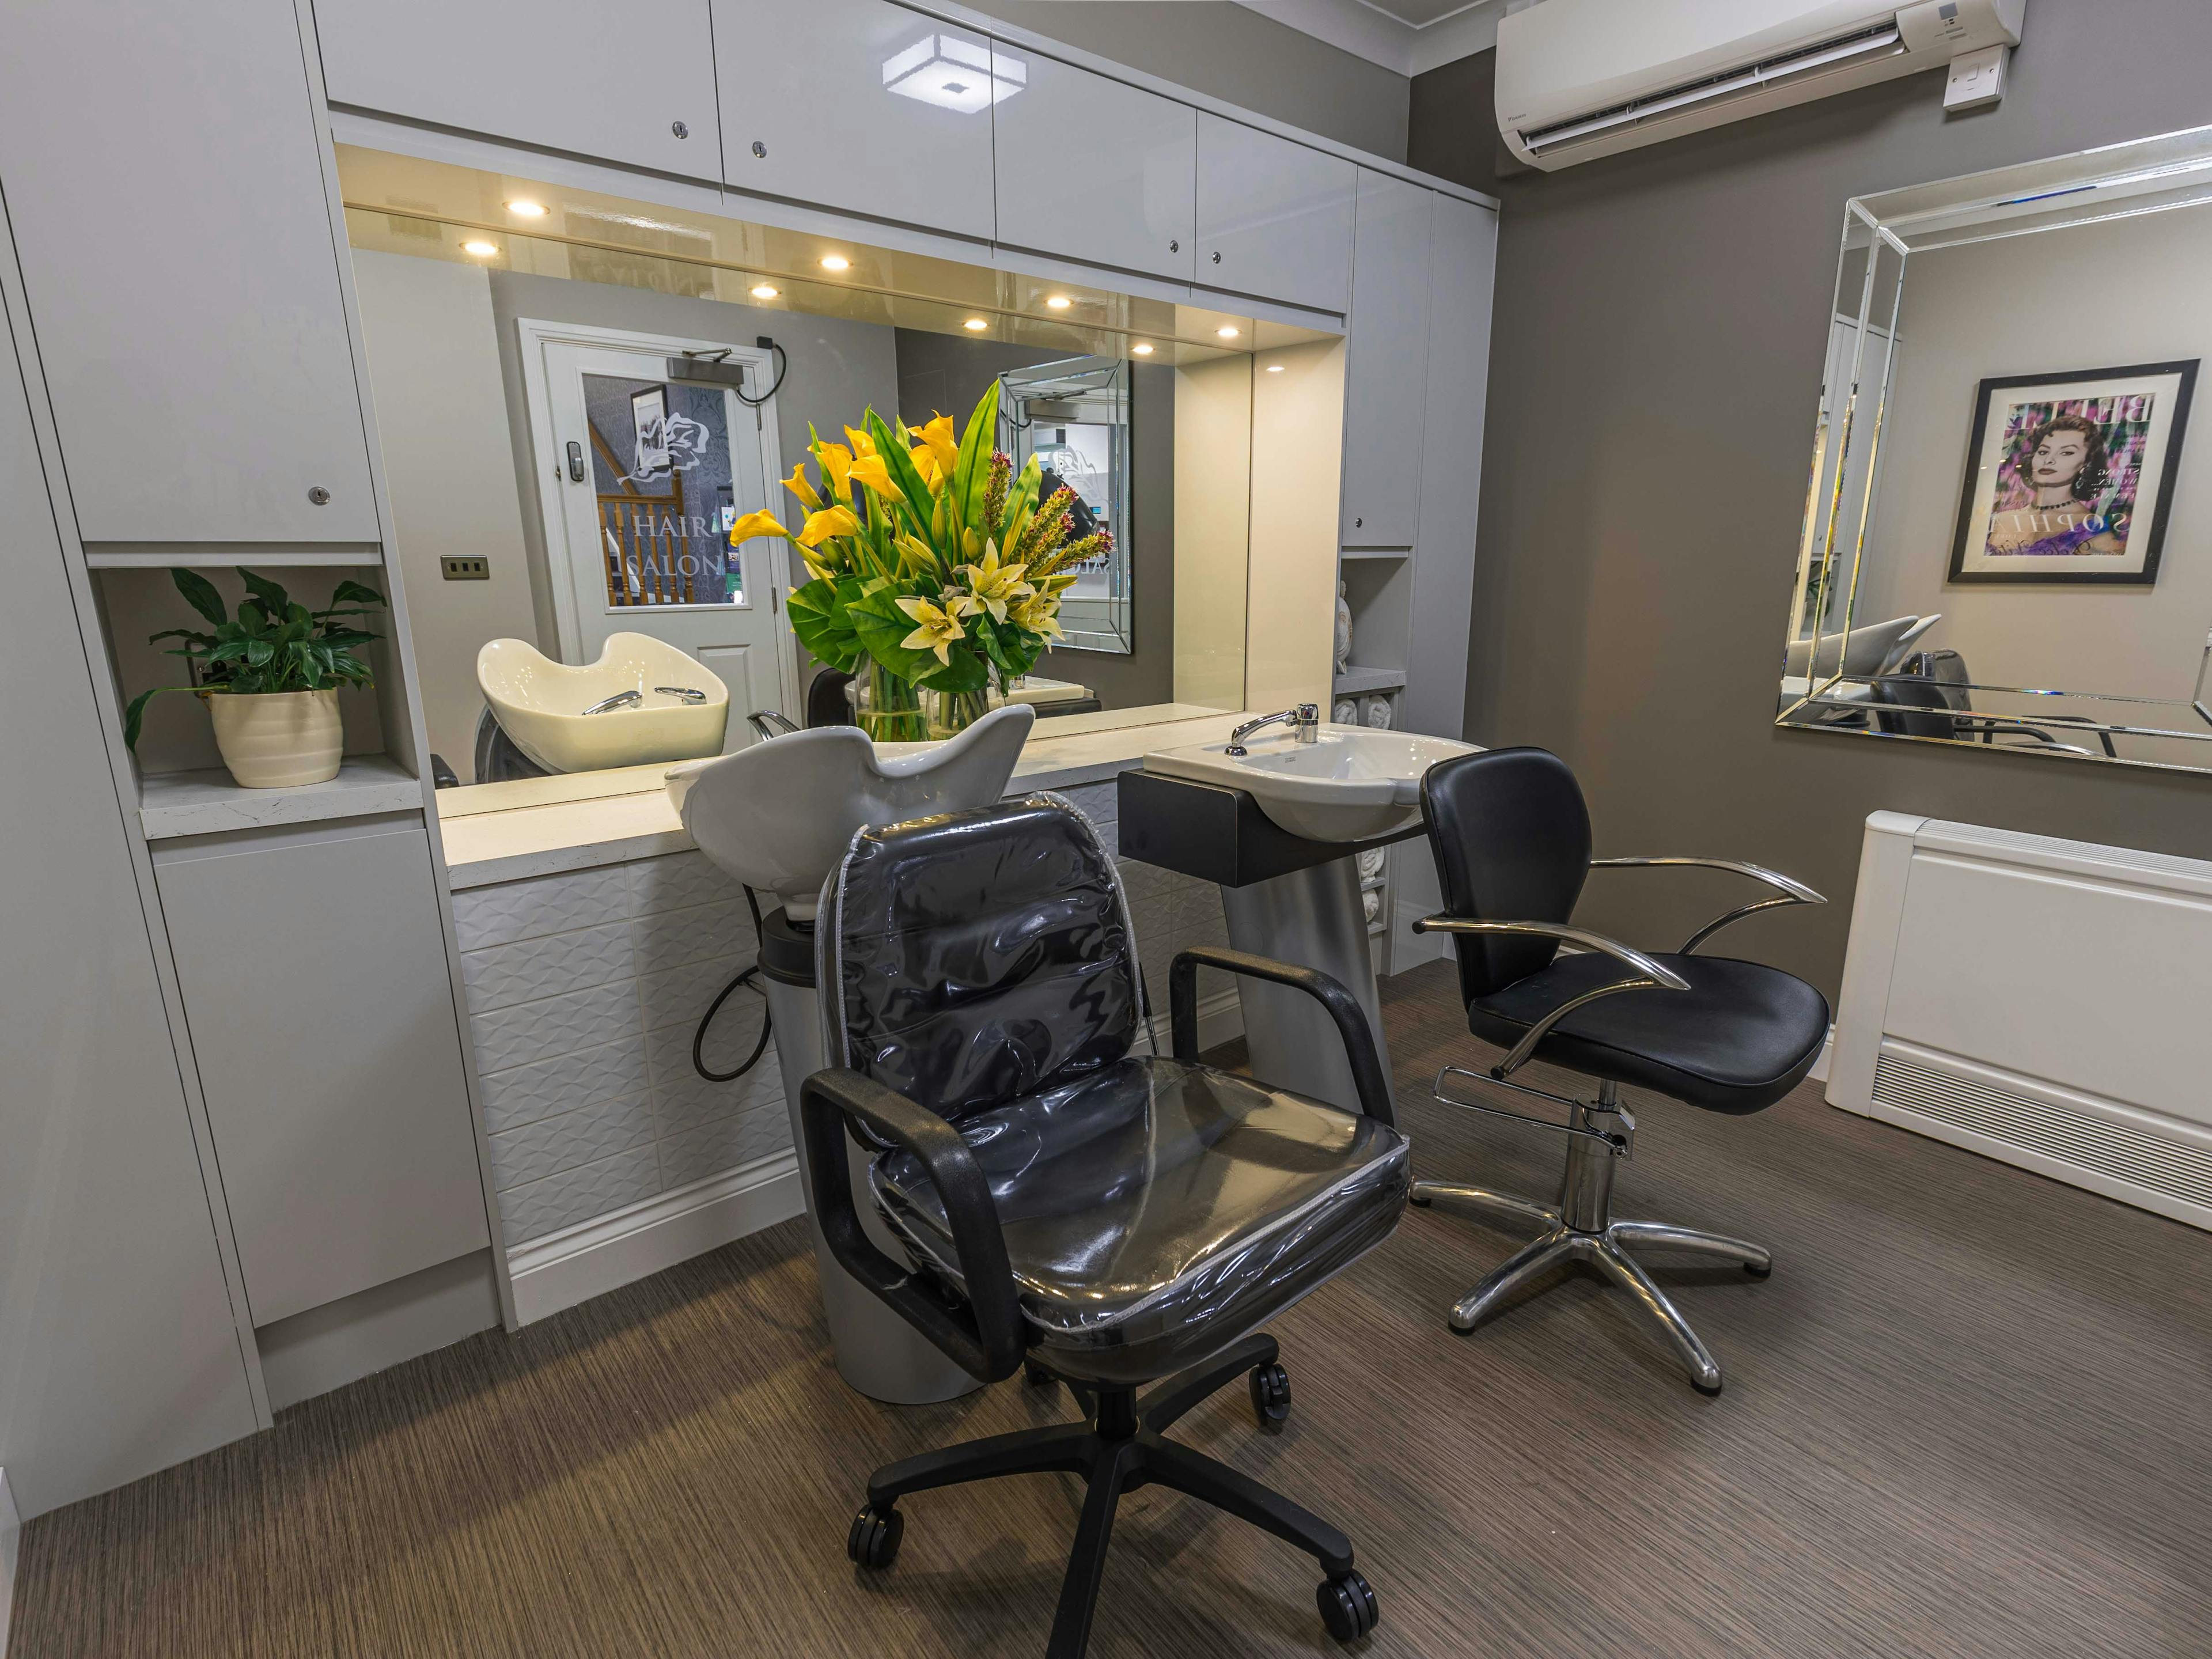 Salon at Sutton Valence Care Home in Maidstone, Kent